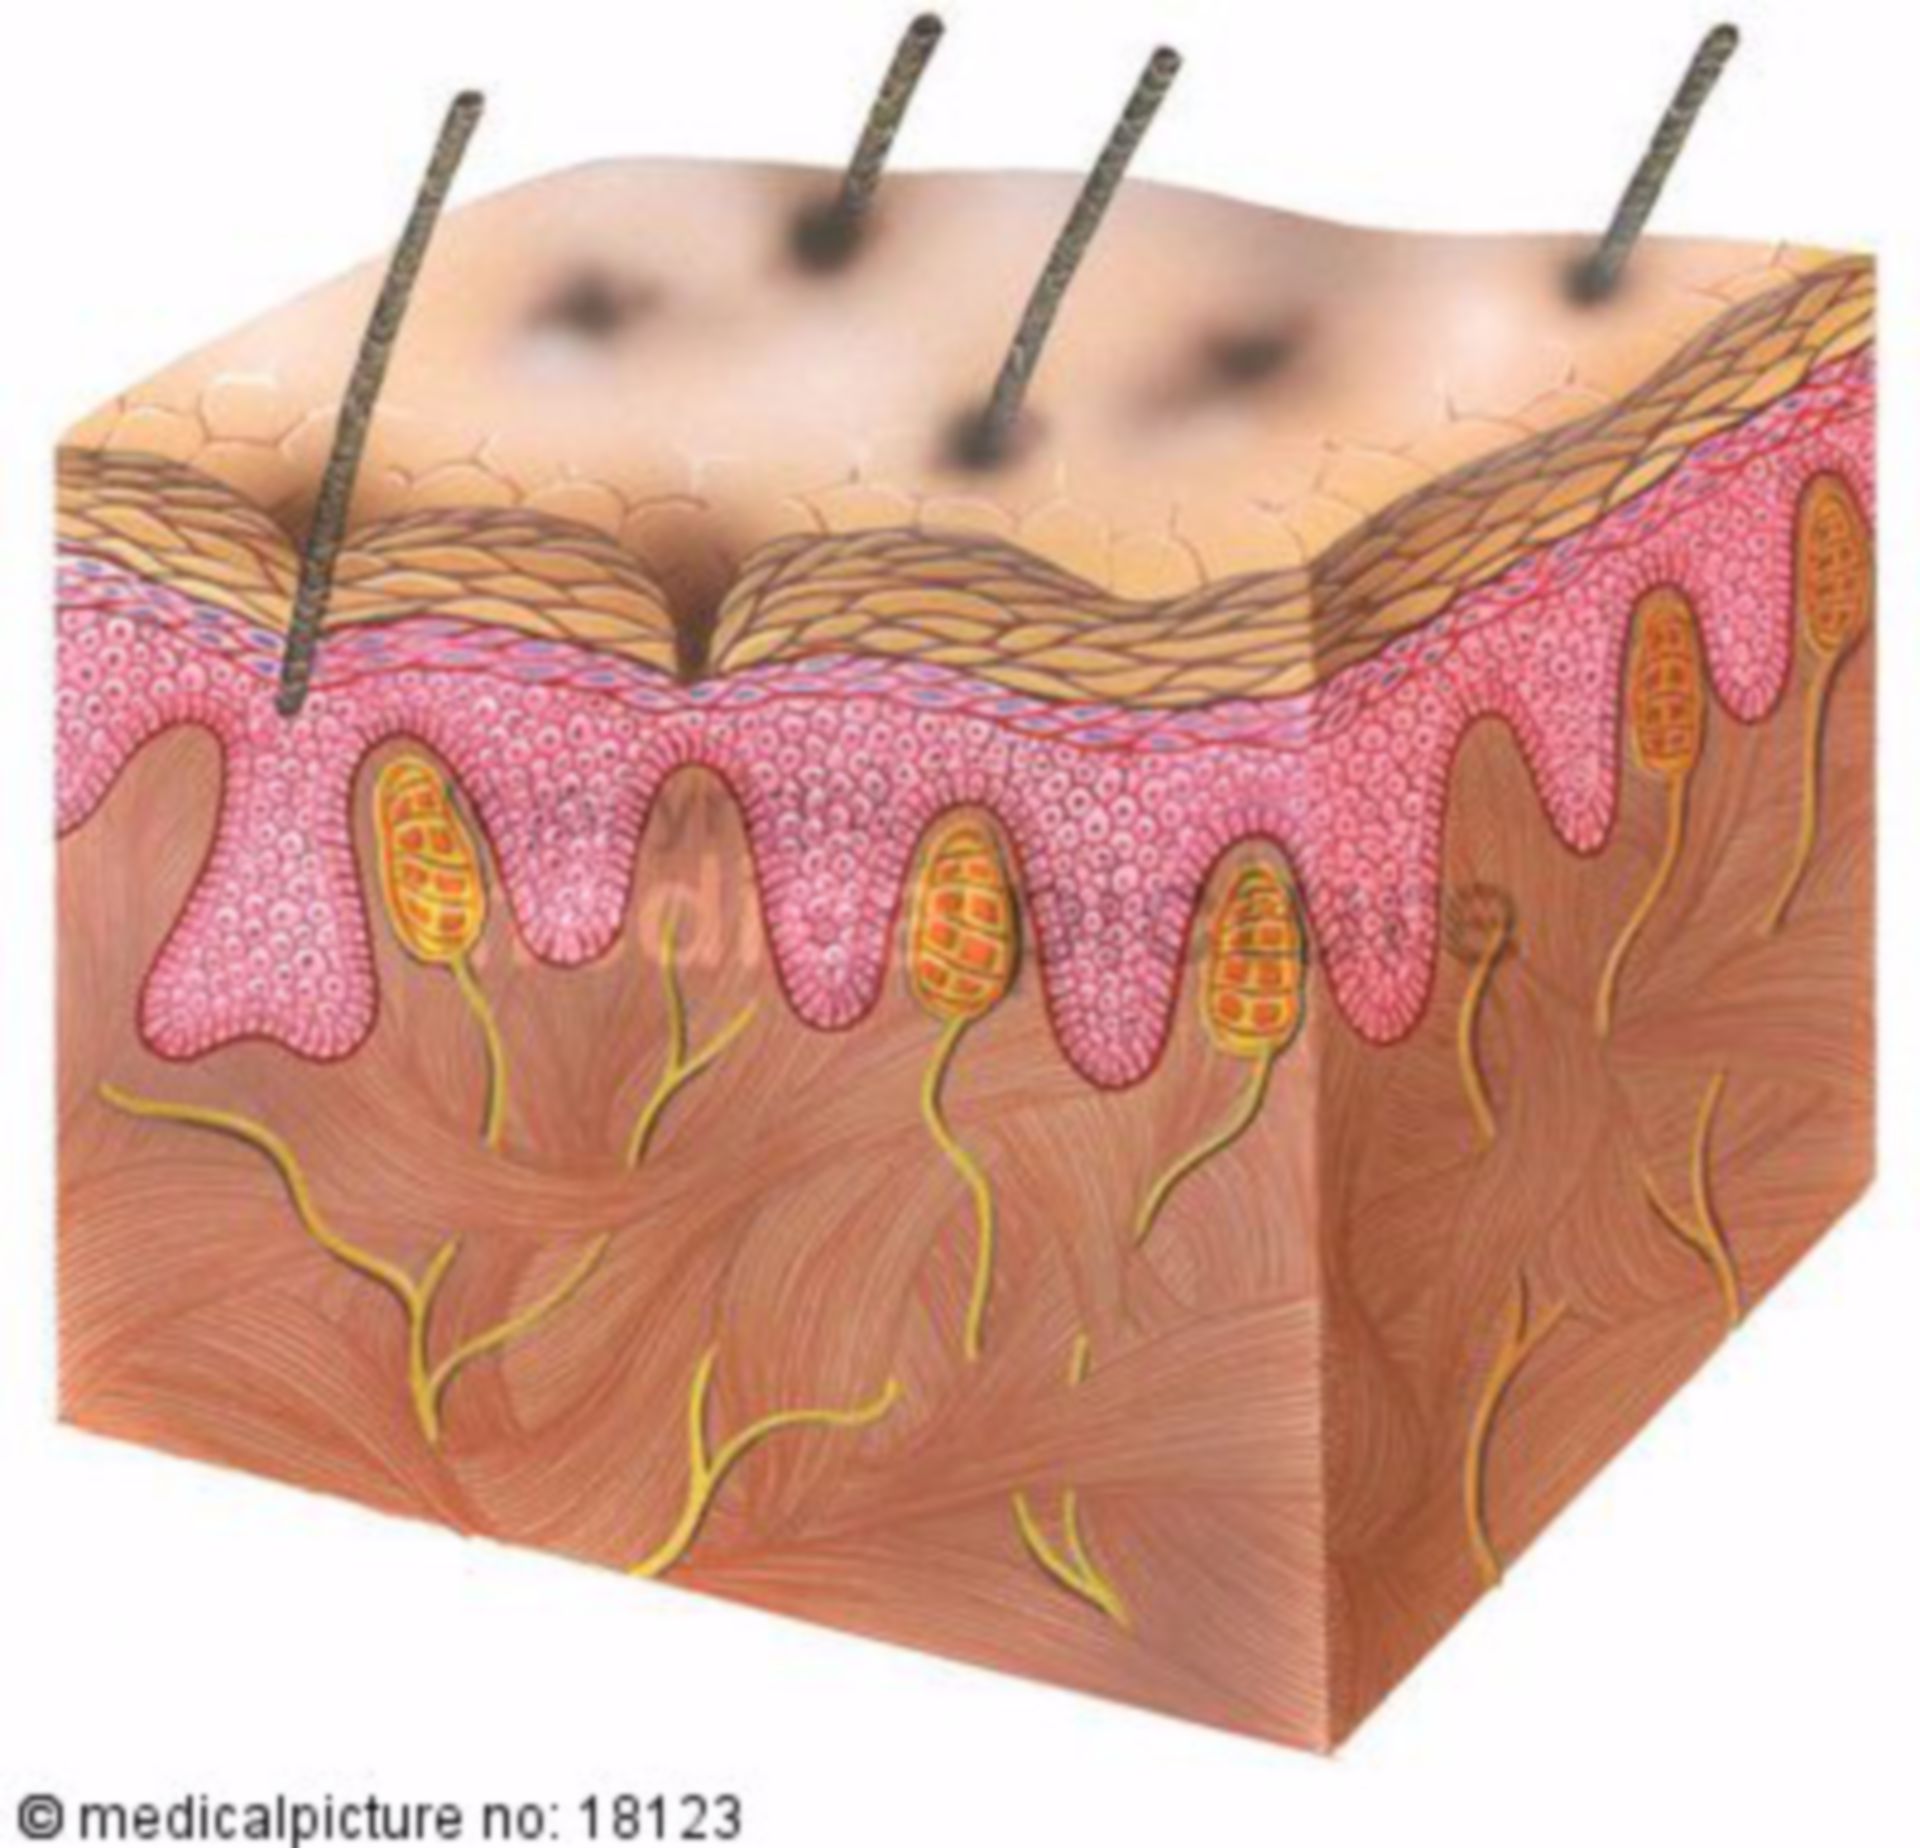 Skin with pressure sensors (tactile corpuscles)